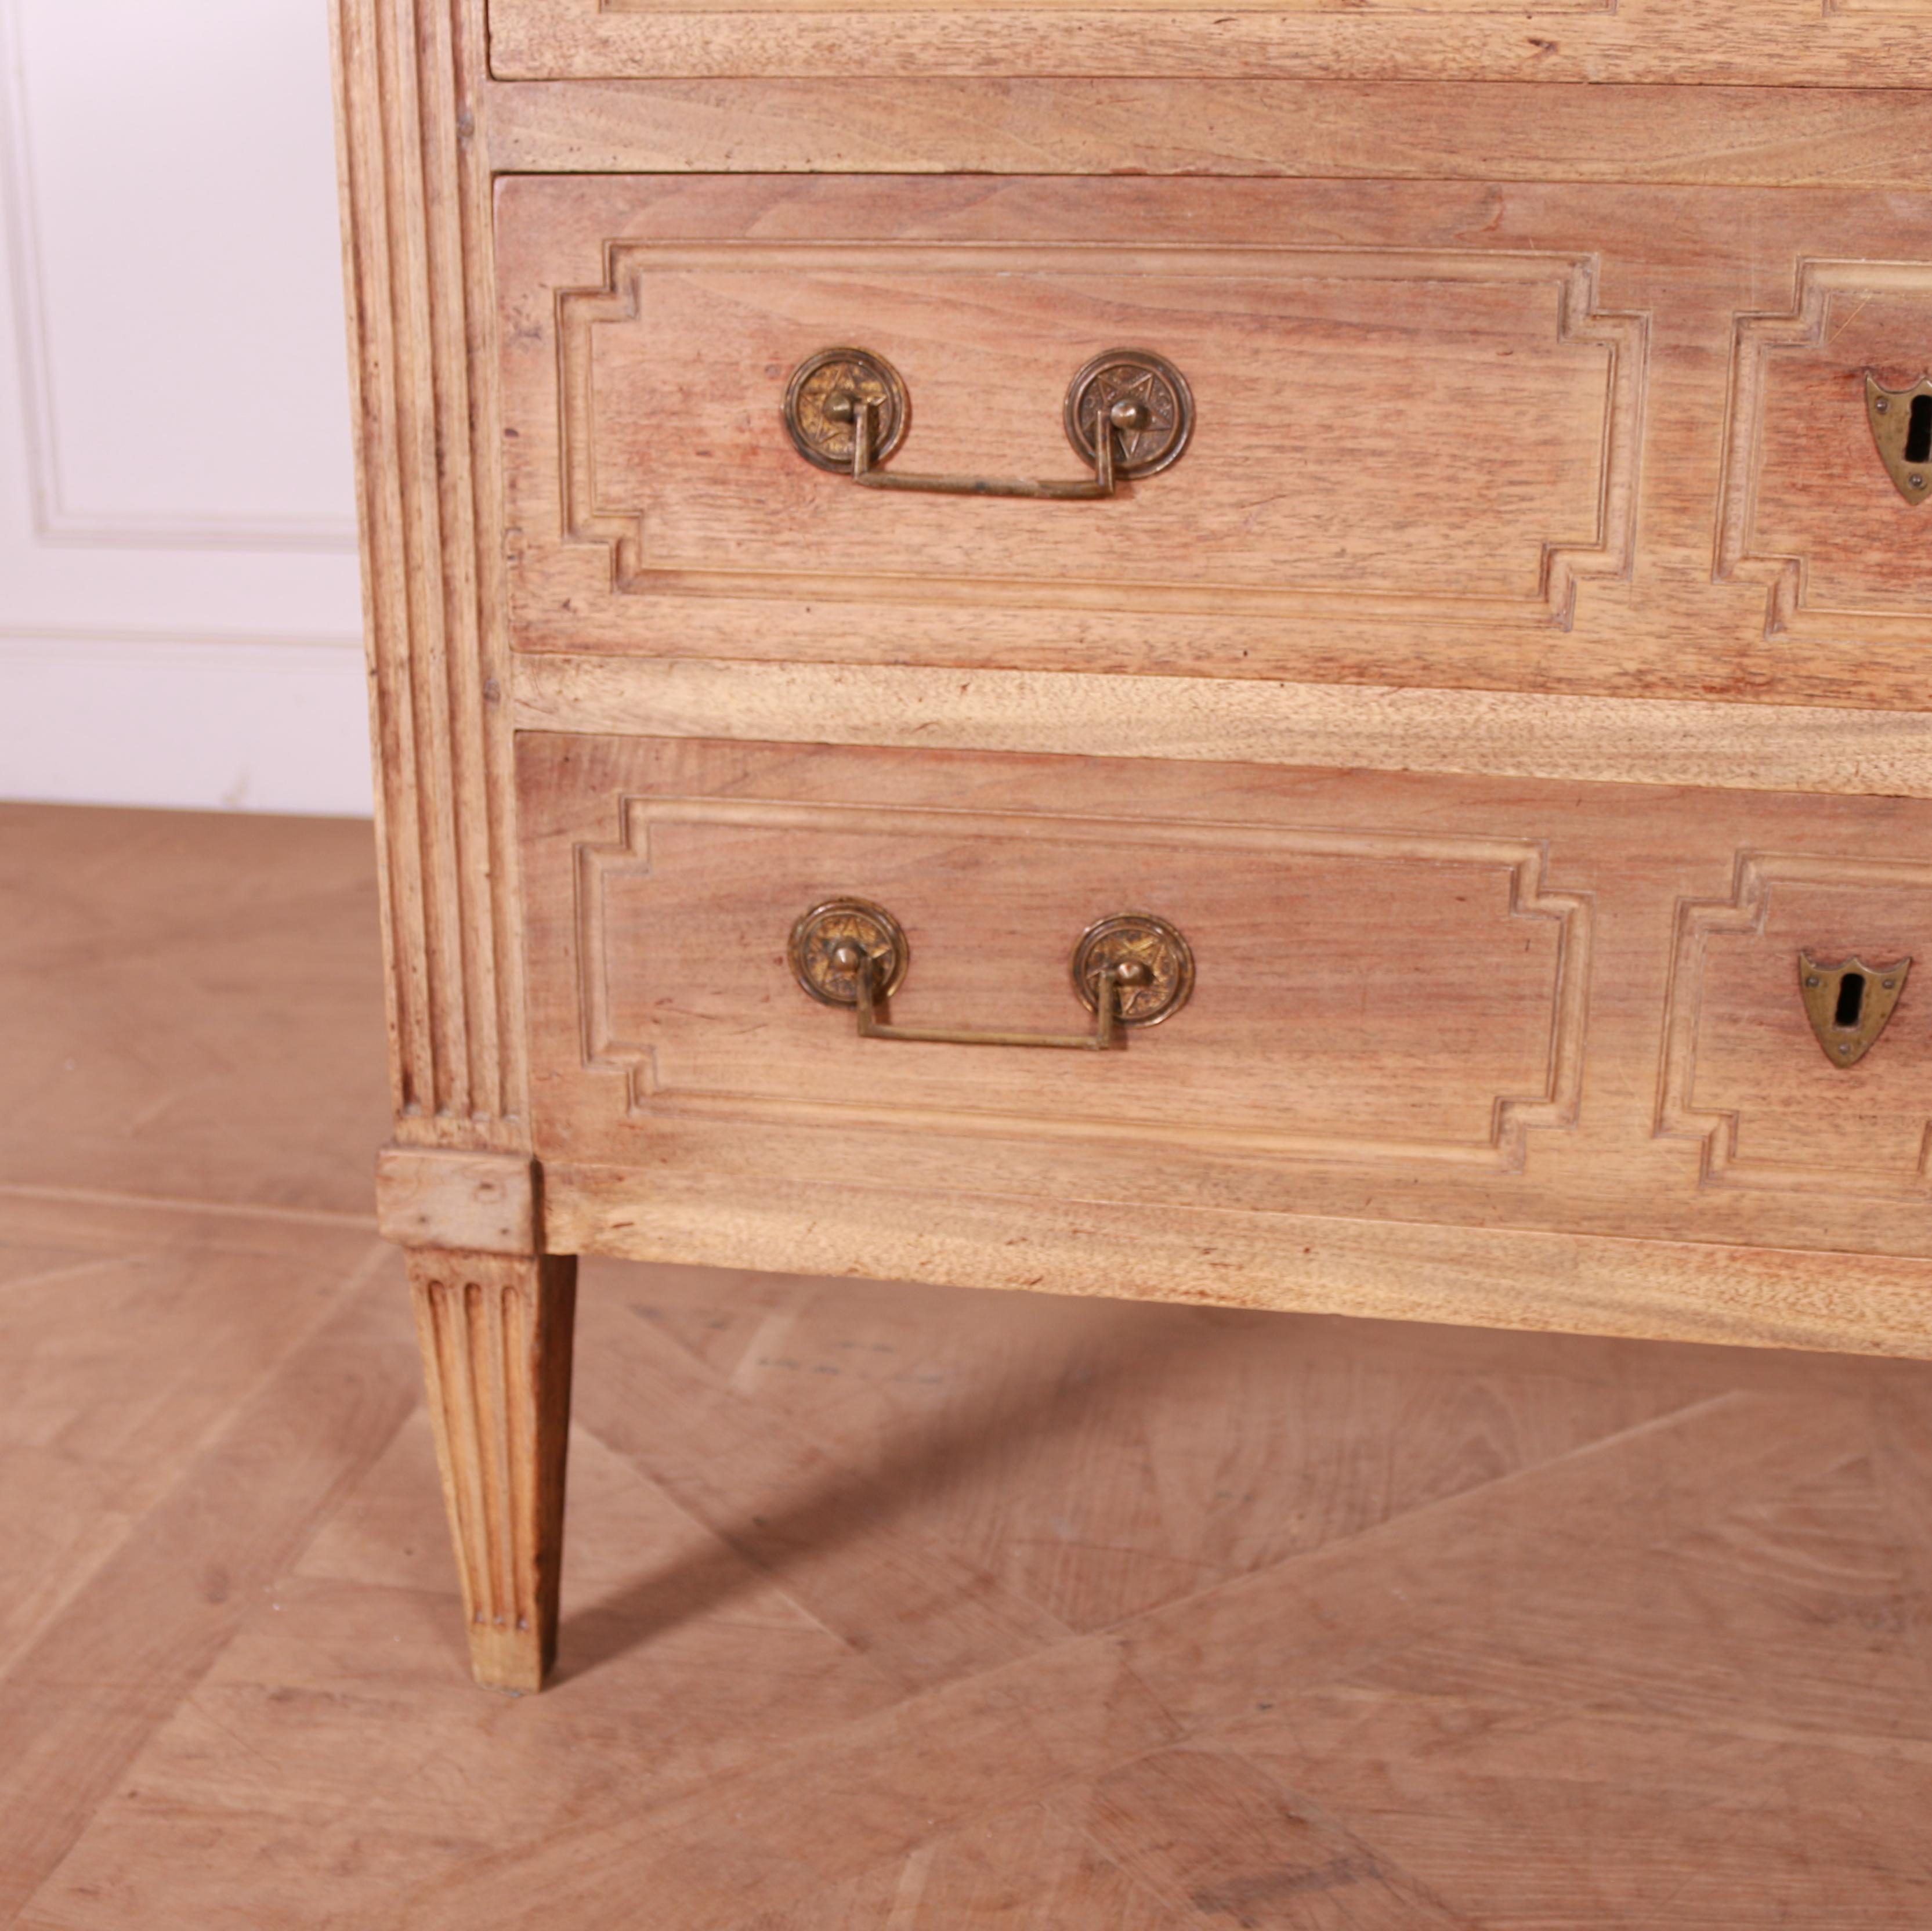 19th Century French Bleached Walnut Commode